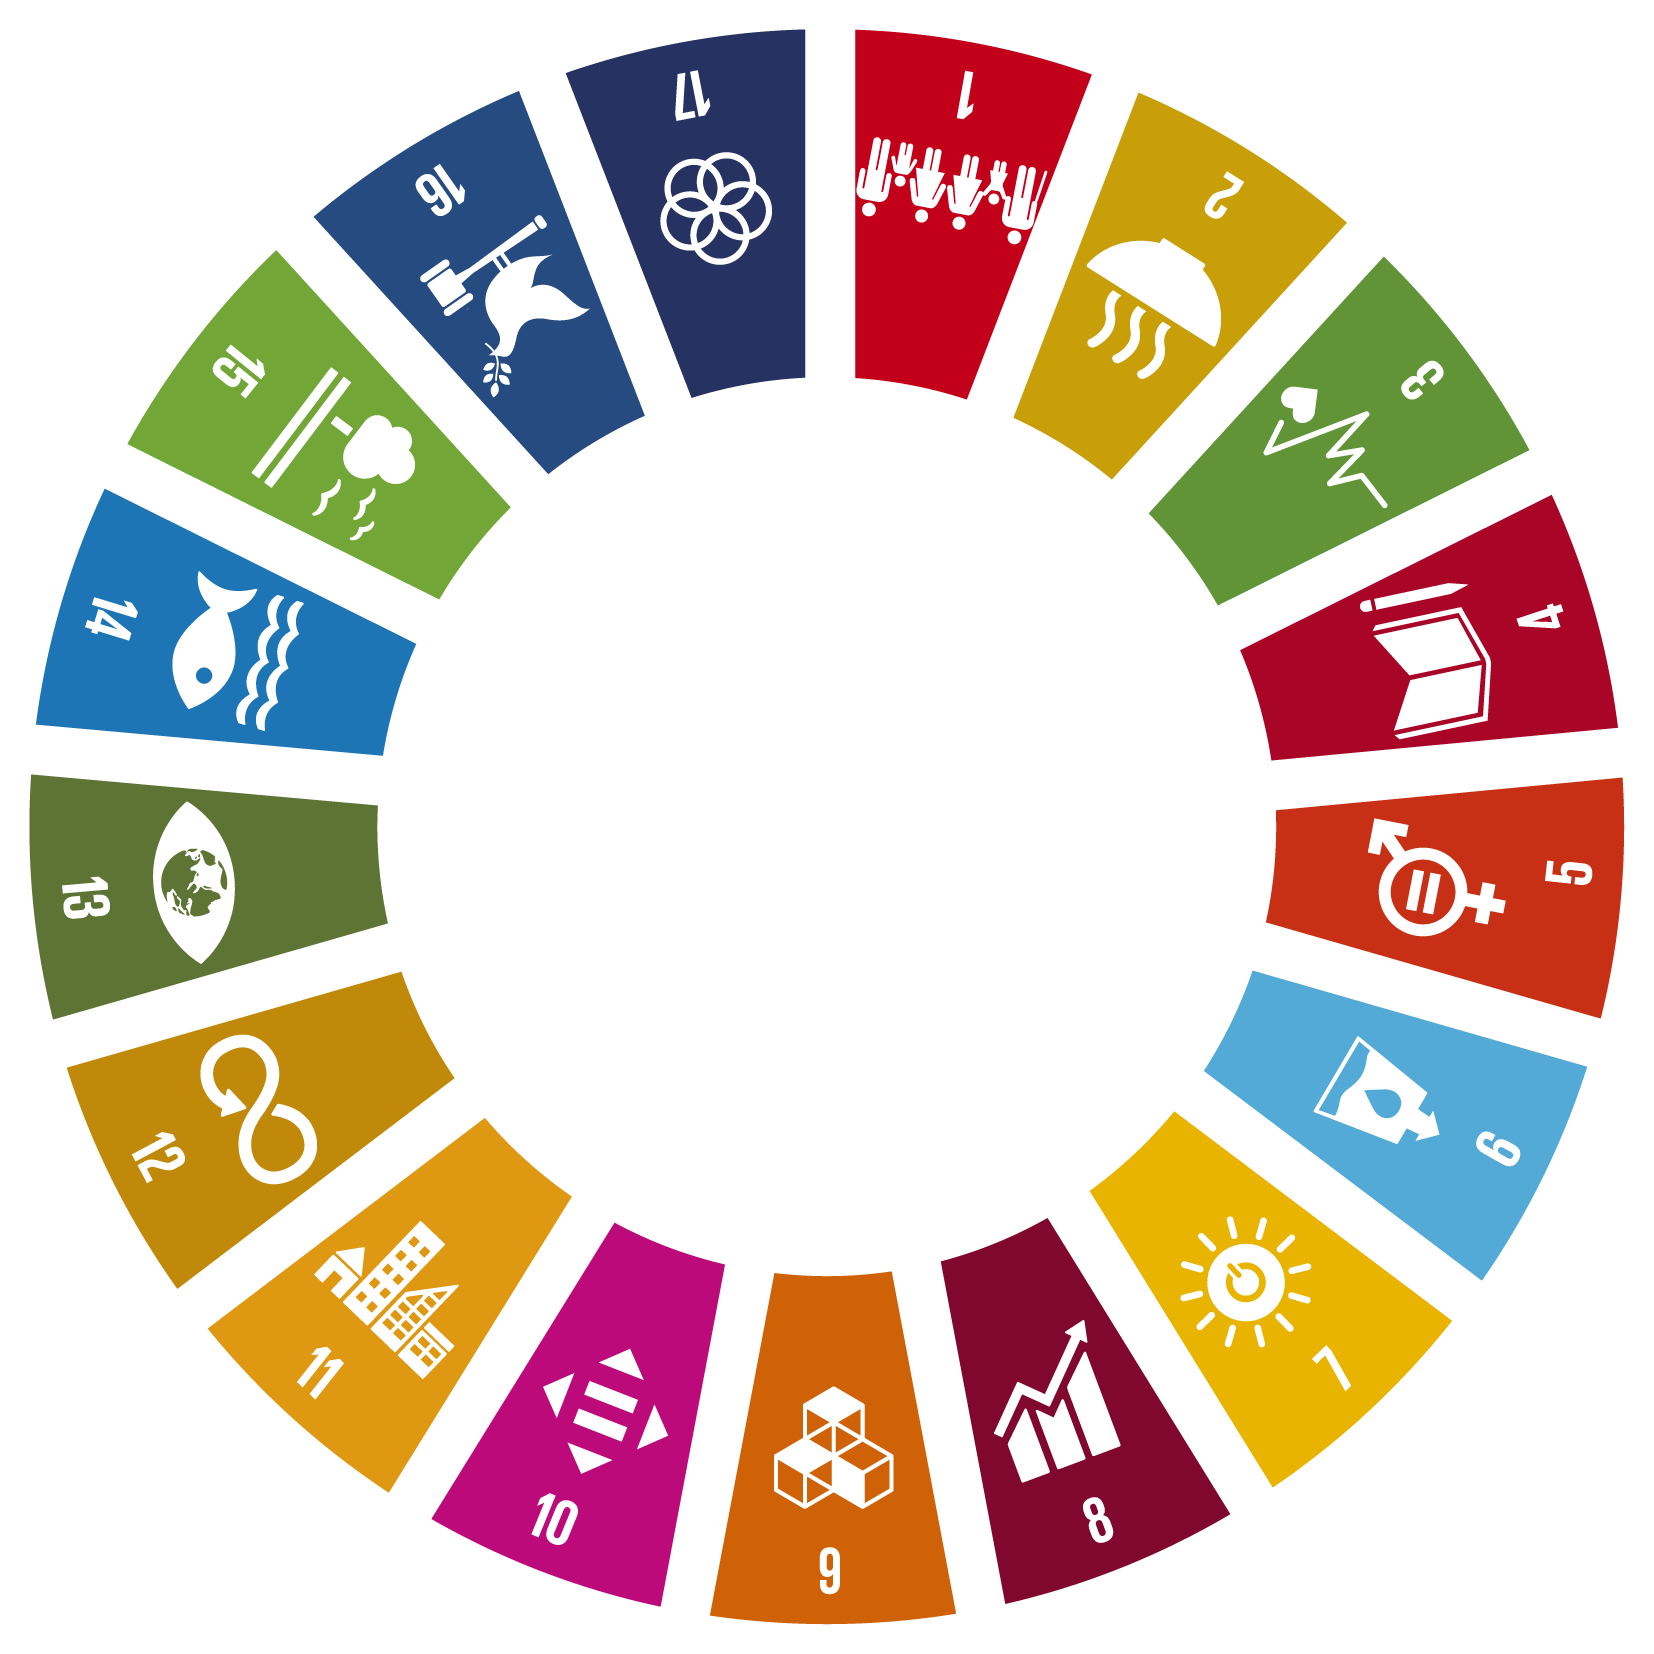 A wheel consisting of the Sustainable Development Goals